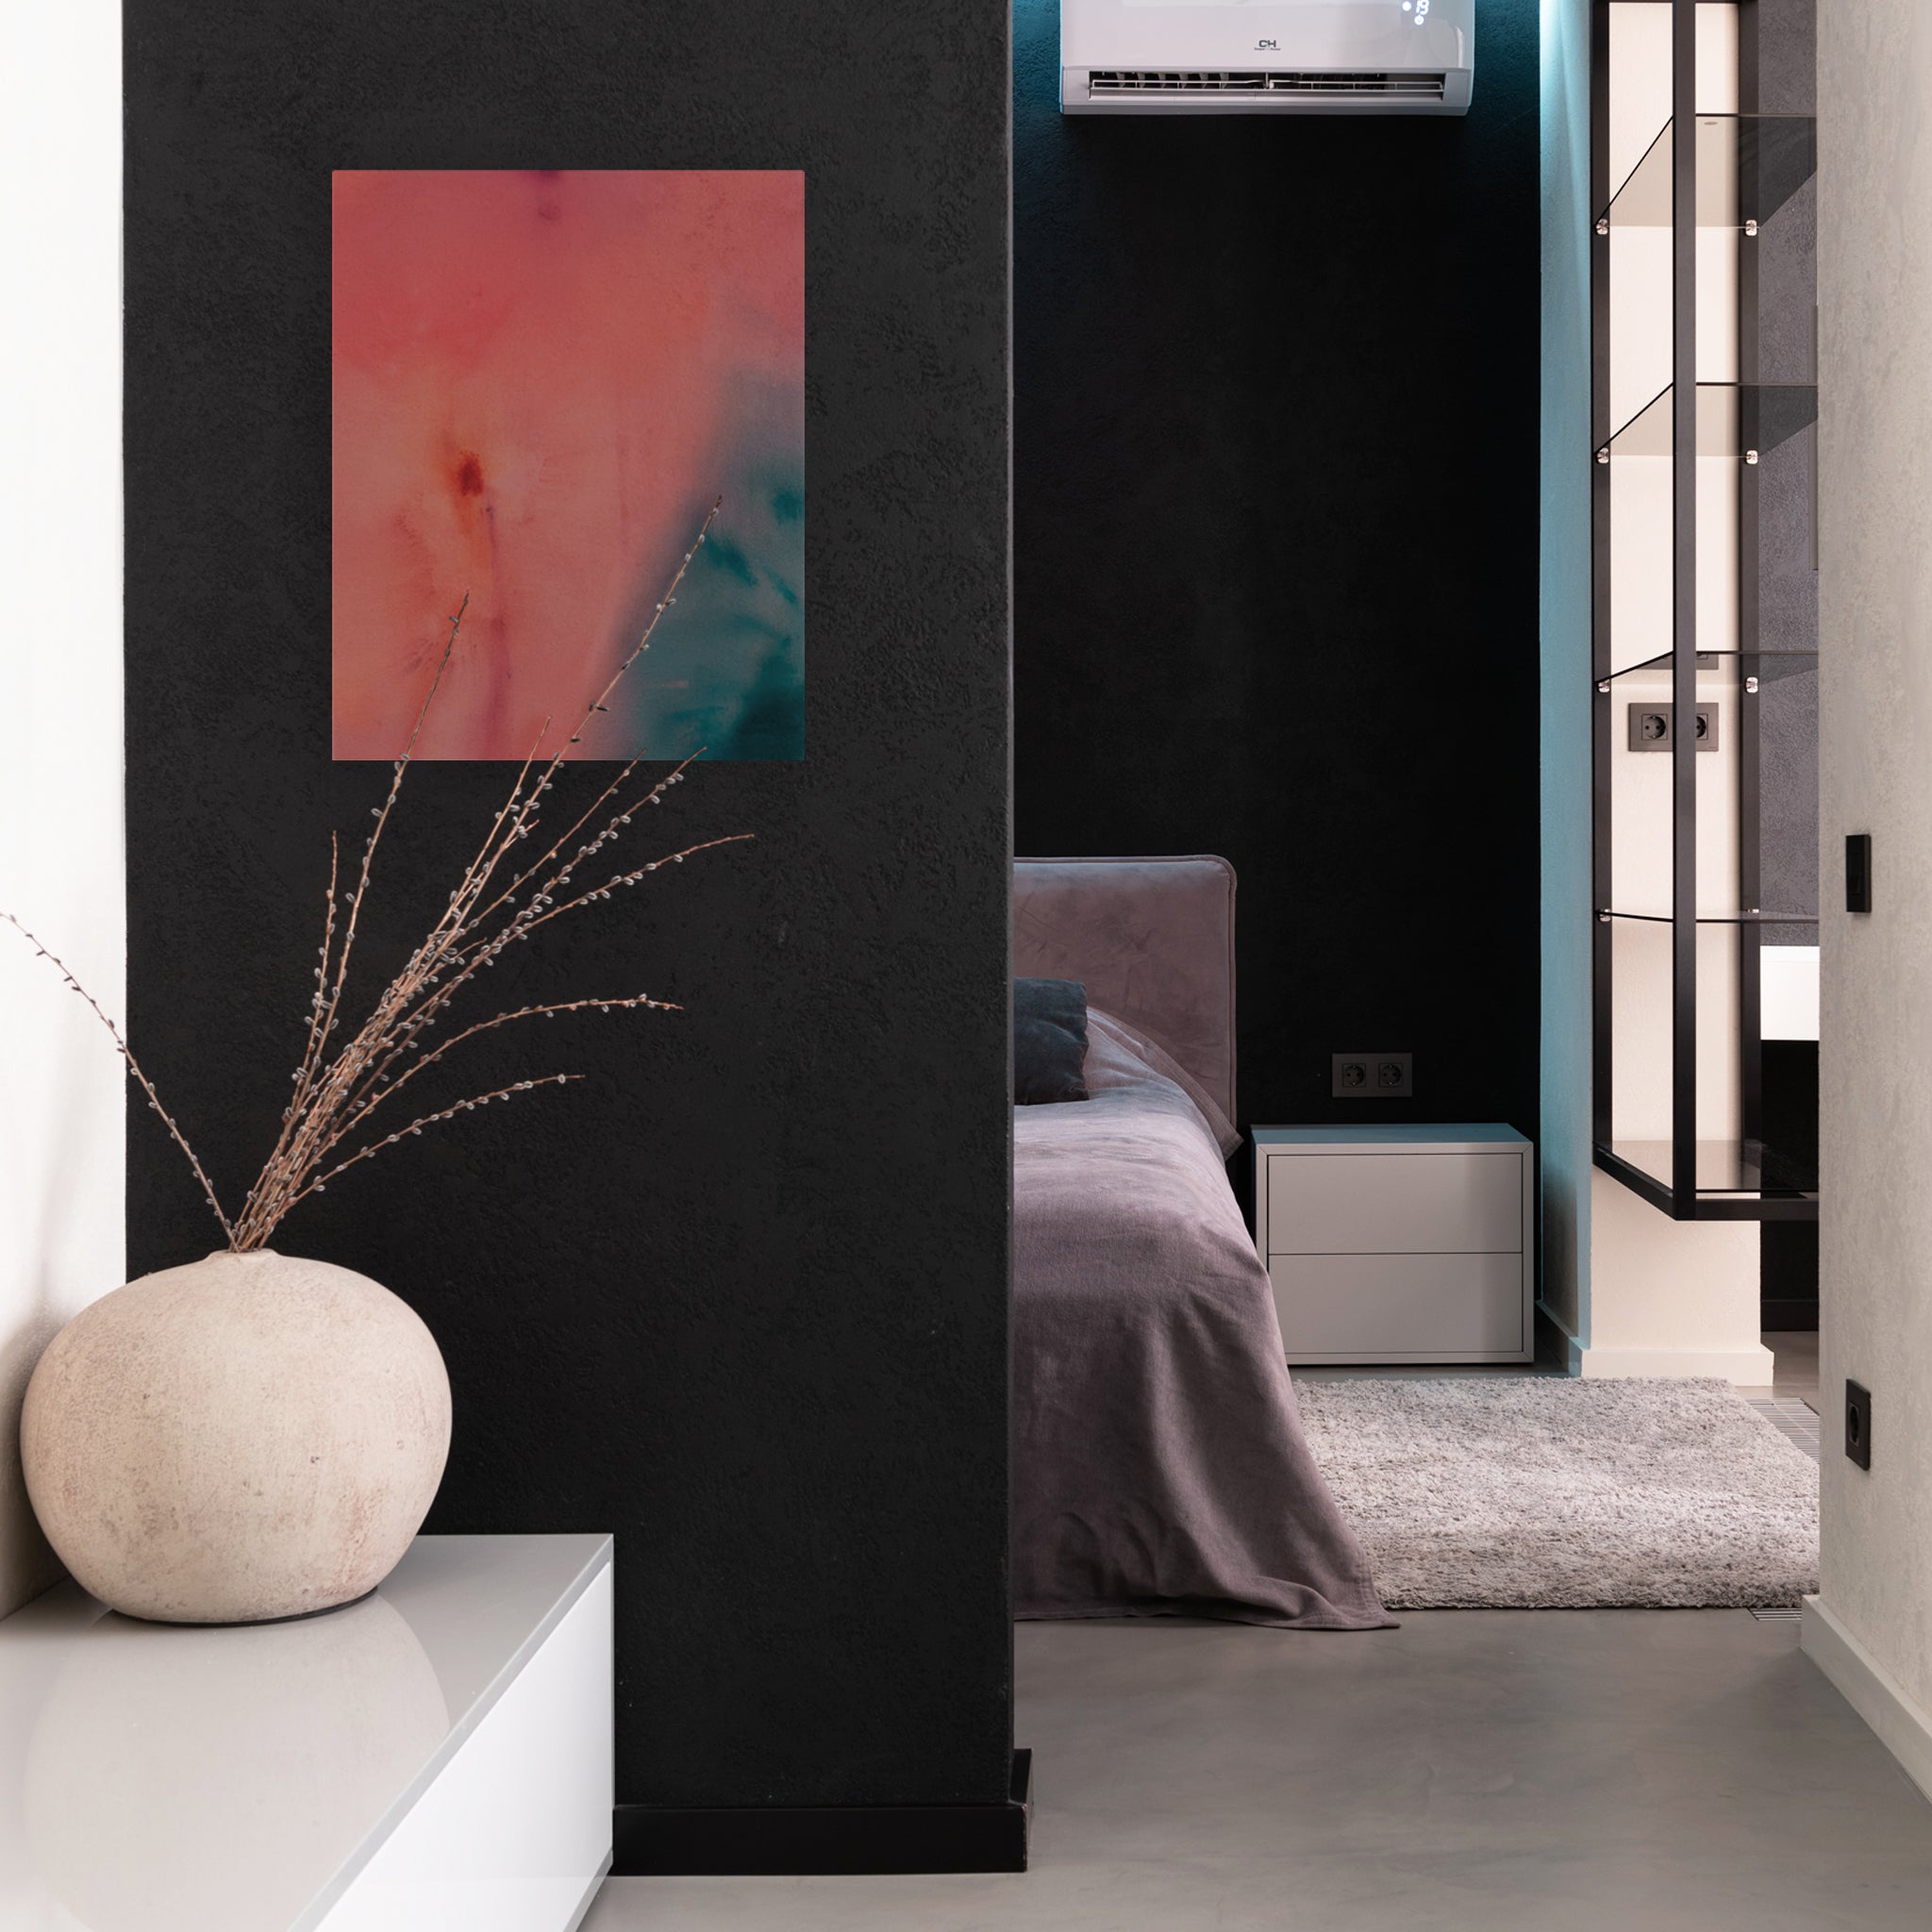 An abstract painting made with pink, purple, blue, and green washes of acrylic paint hangs on a black wall in a sleek home or hotel room.